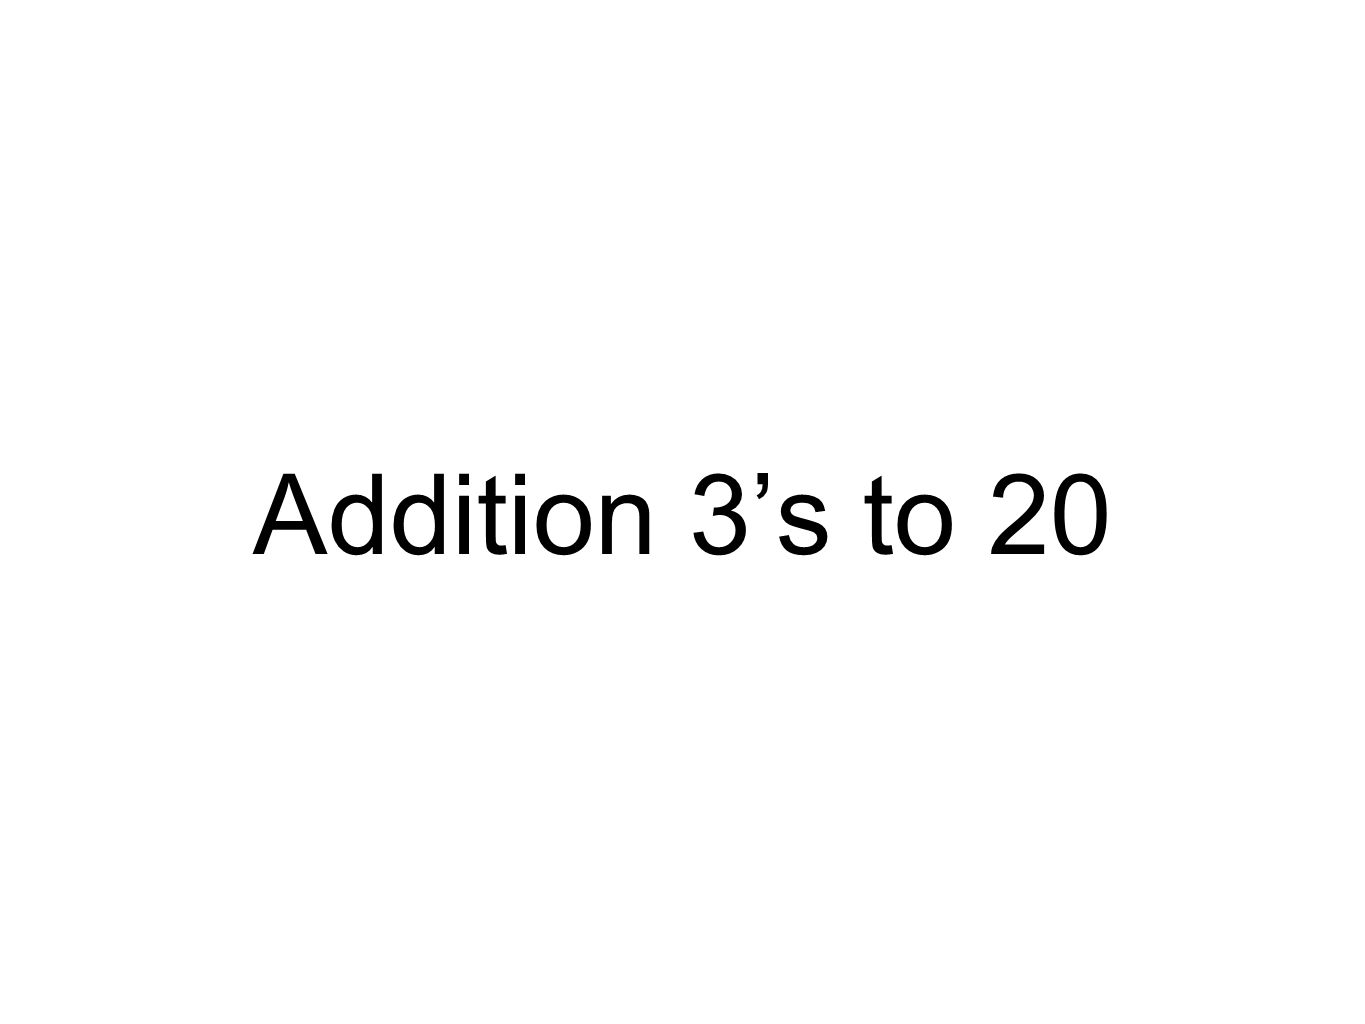 Addition 3’s to 20